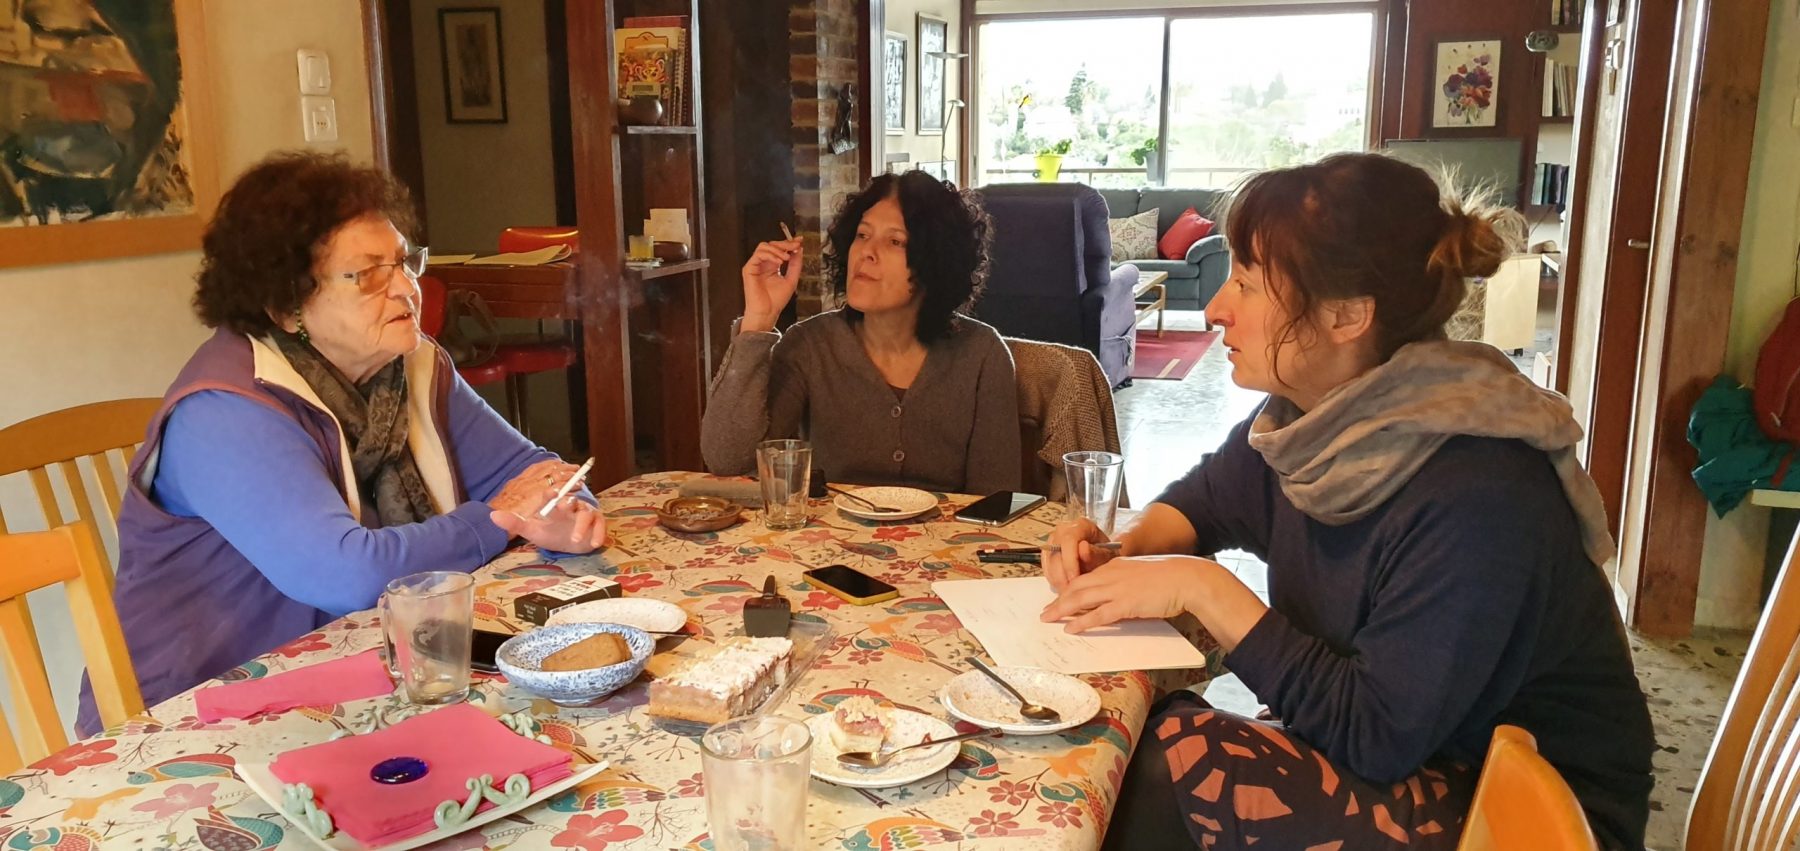 Barbara, Emmie, and Orli around the table